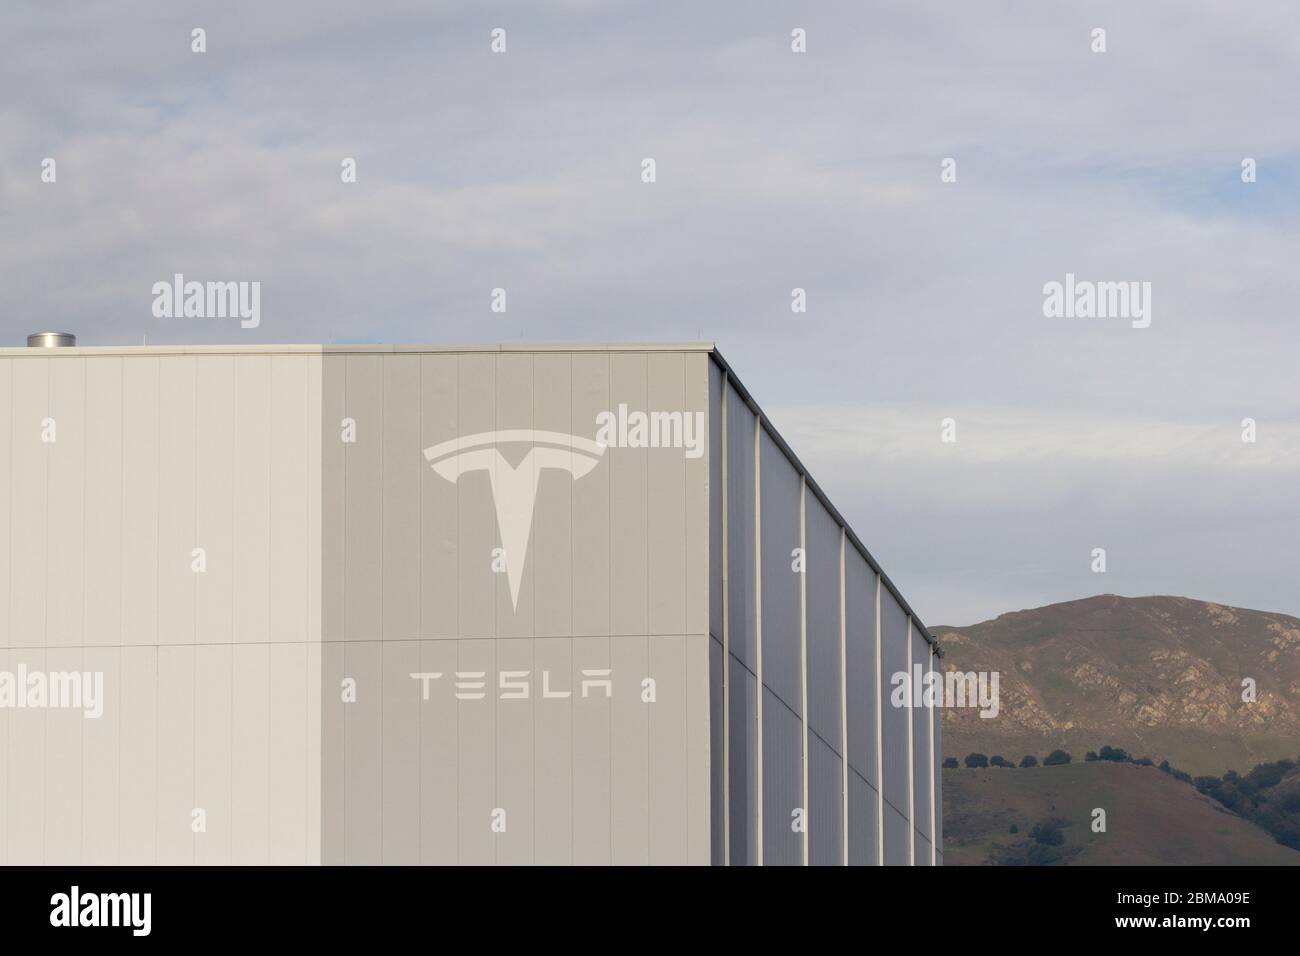 The Tesla sign seen at Tesla Factory in Fremont, California. Tesla, Inc., is an American electric vehicle and clean energy company based in Palo Alto. Stock Photo